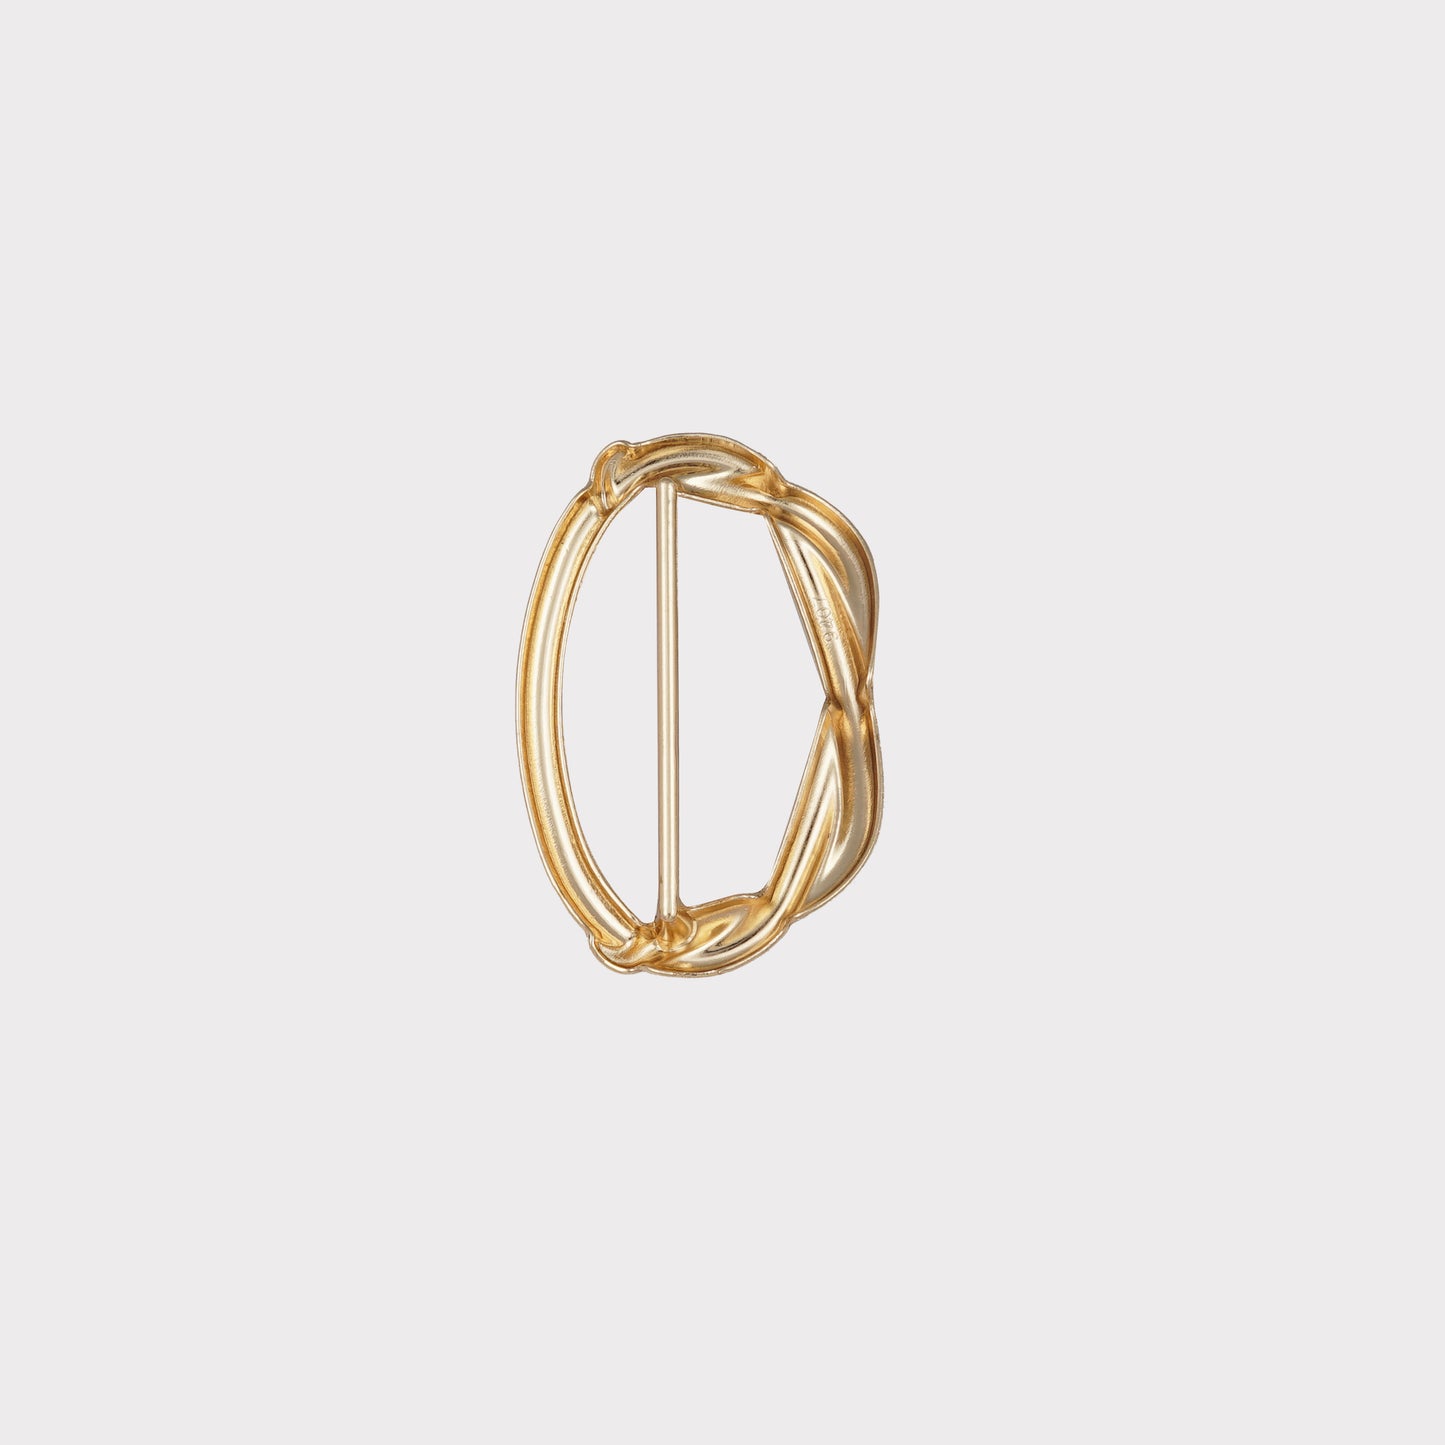 Oval Shape New Design Golden Buckle (Pack of 1 Pc)